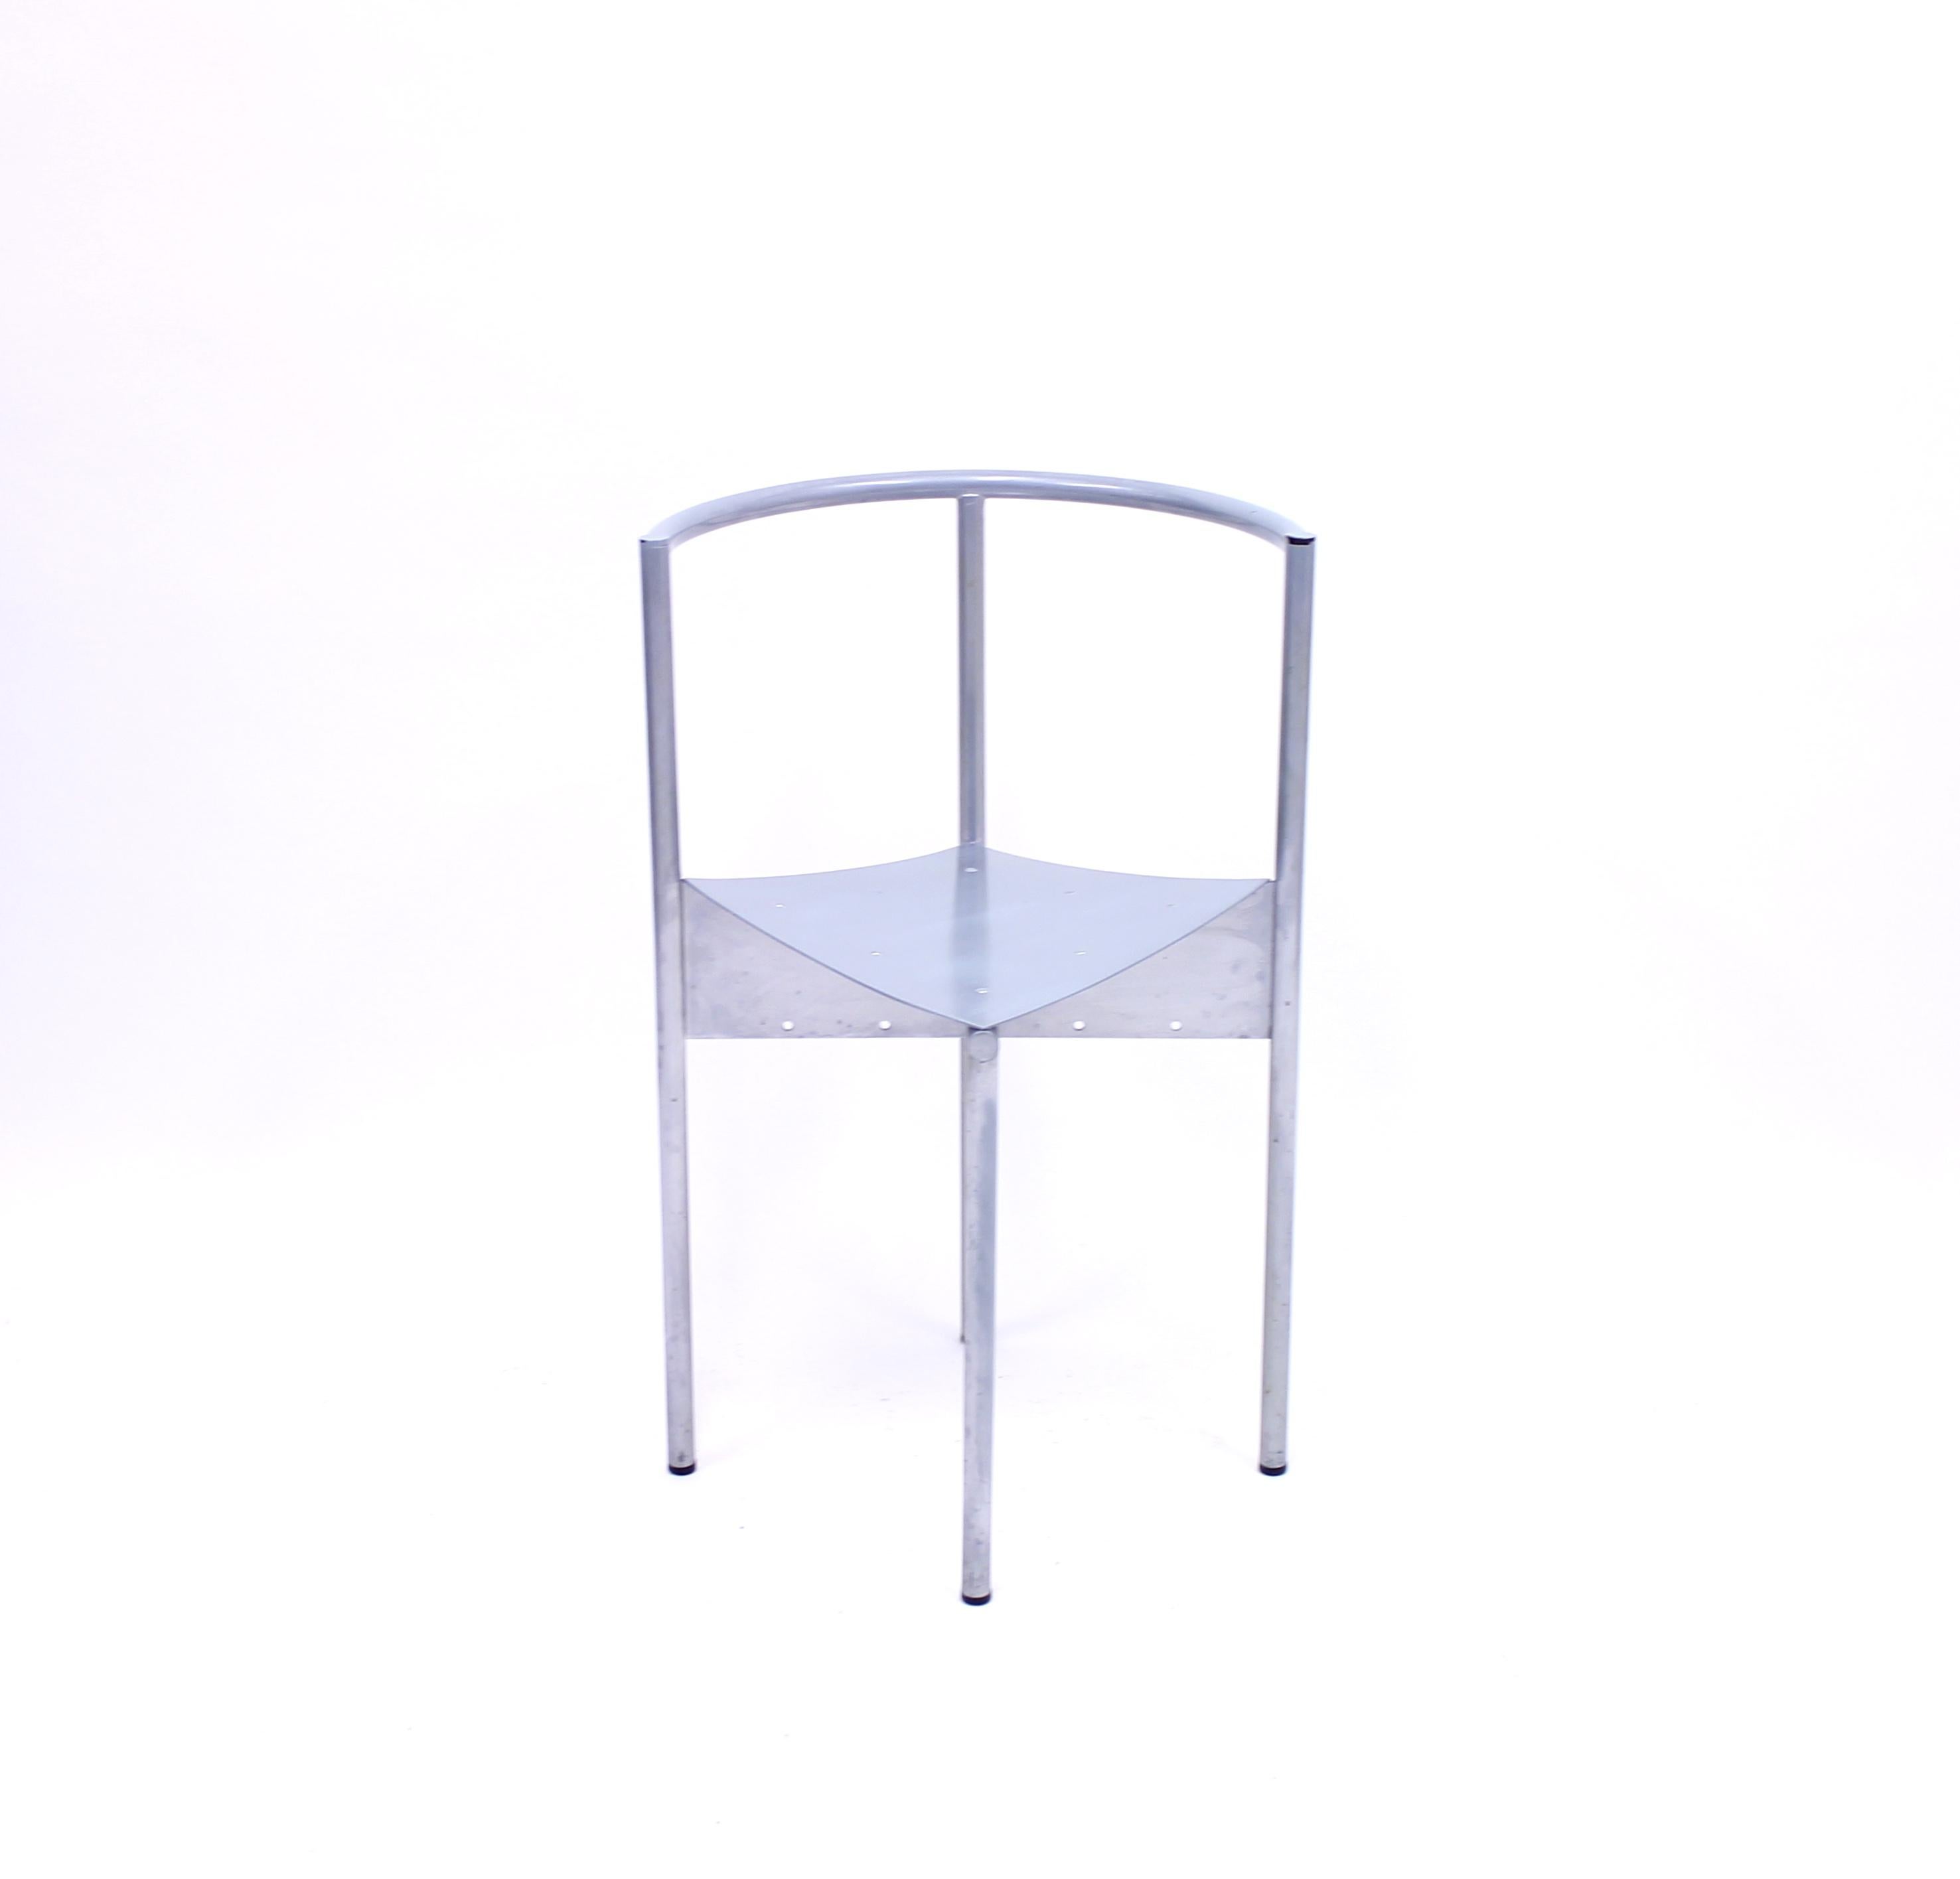 Metal Philippe Starck, Wendy Wright Chair, Disform, 1986